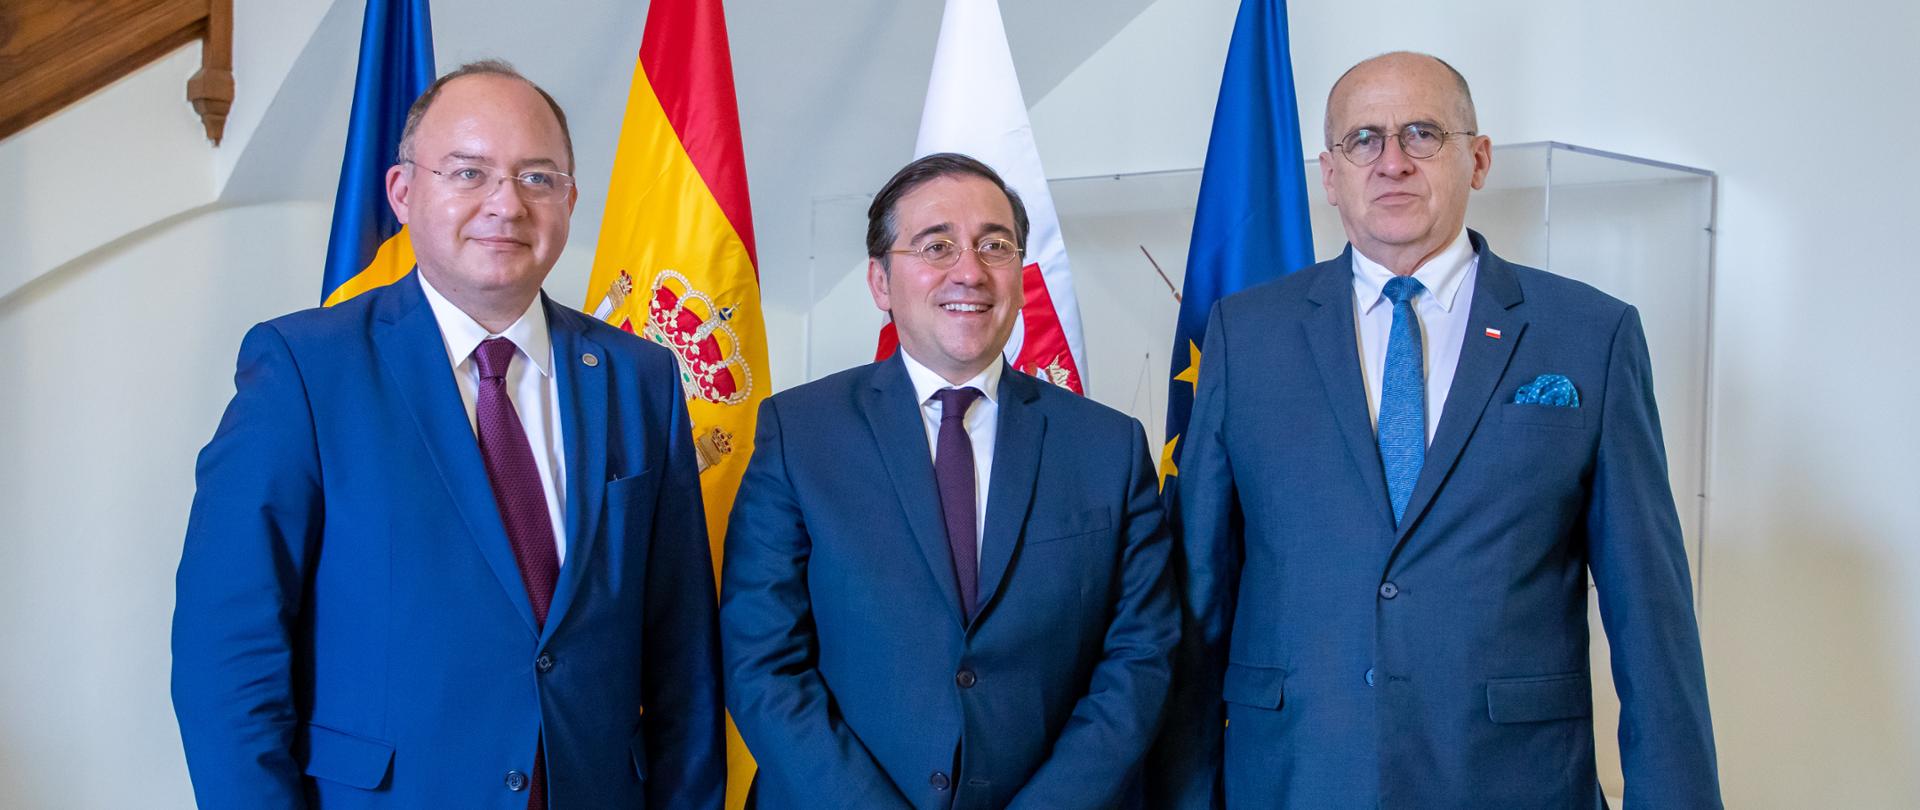 Minister of Foreign Affairs Zbigniew Rau took part in a trilateral summit of the chief diplomats of Poland, Spain, and Romania